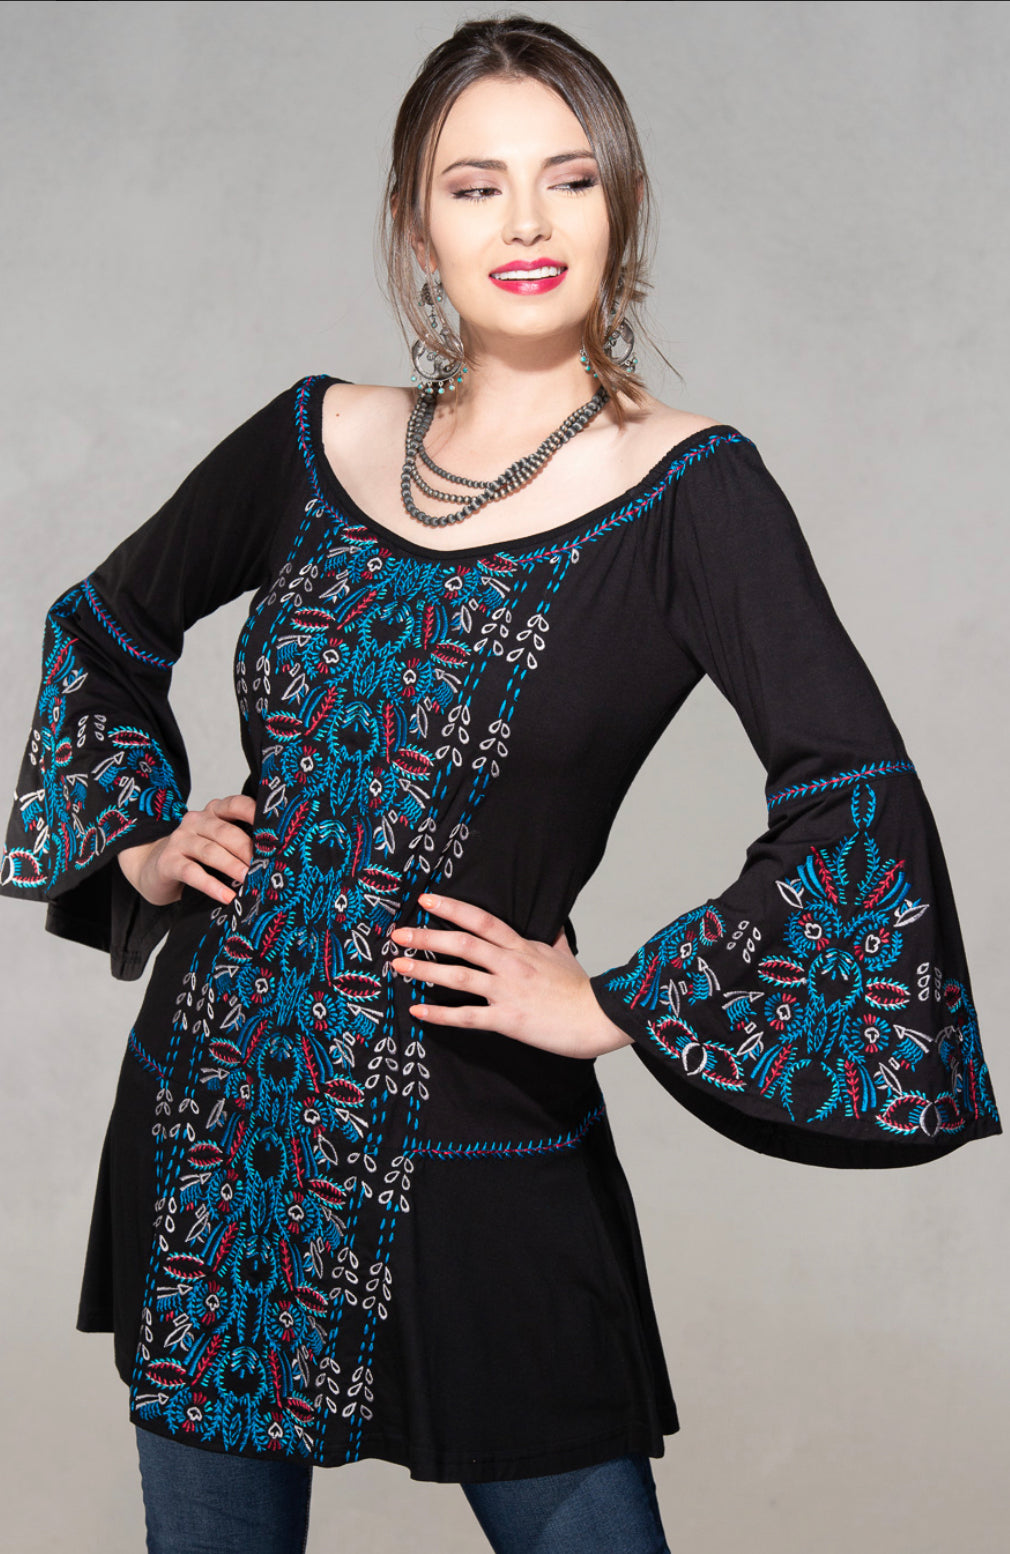 Black Tunic w/ Fabulous Embroidery Details